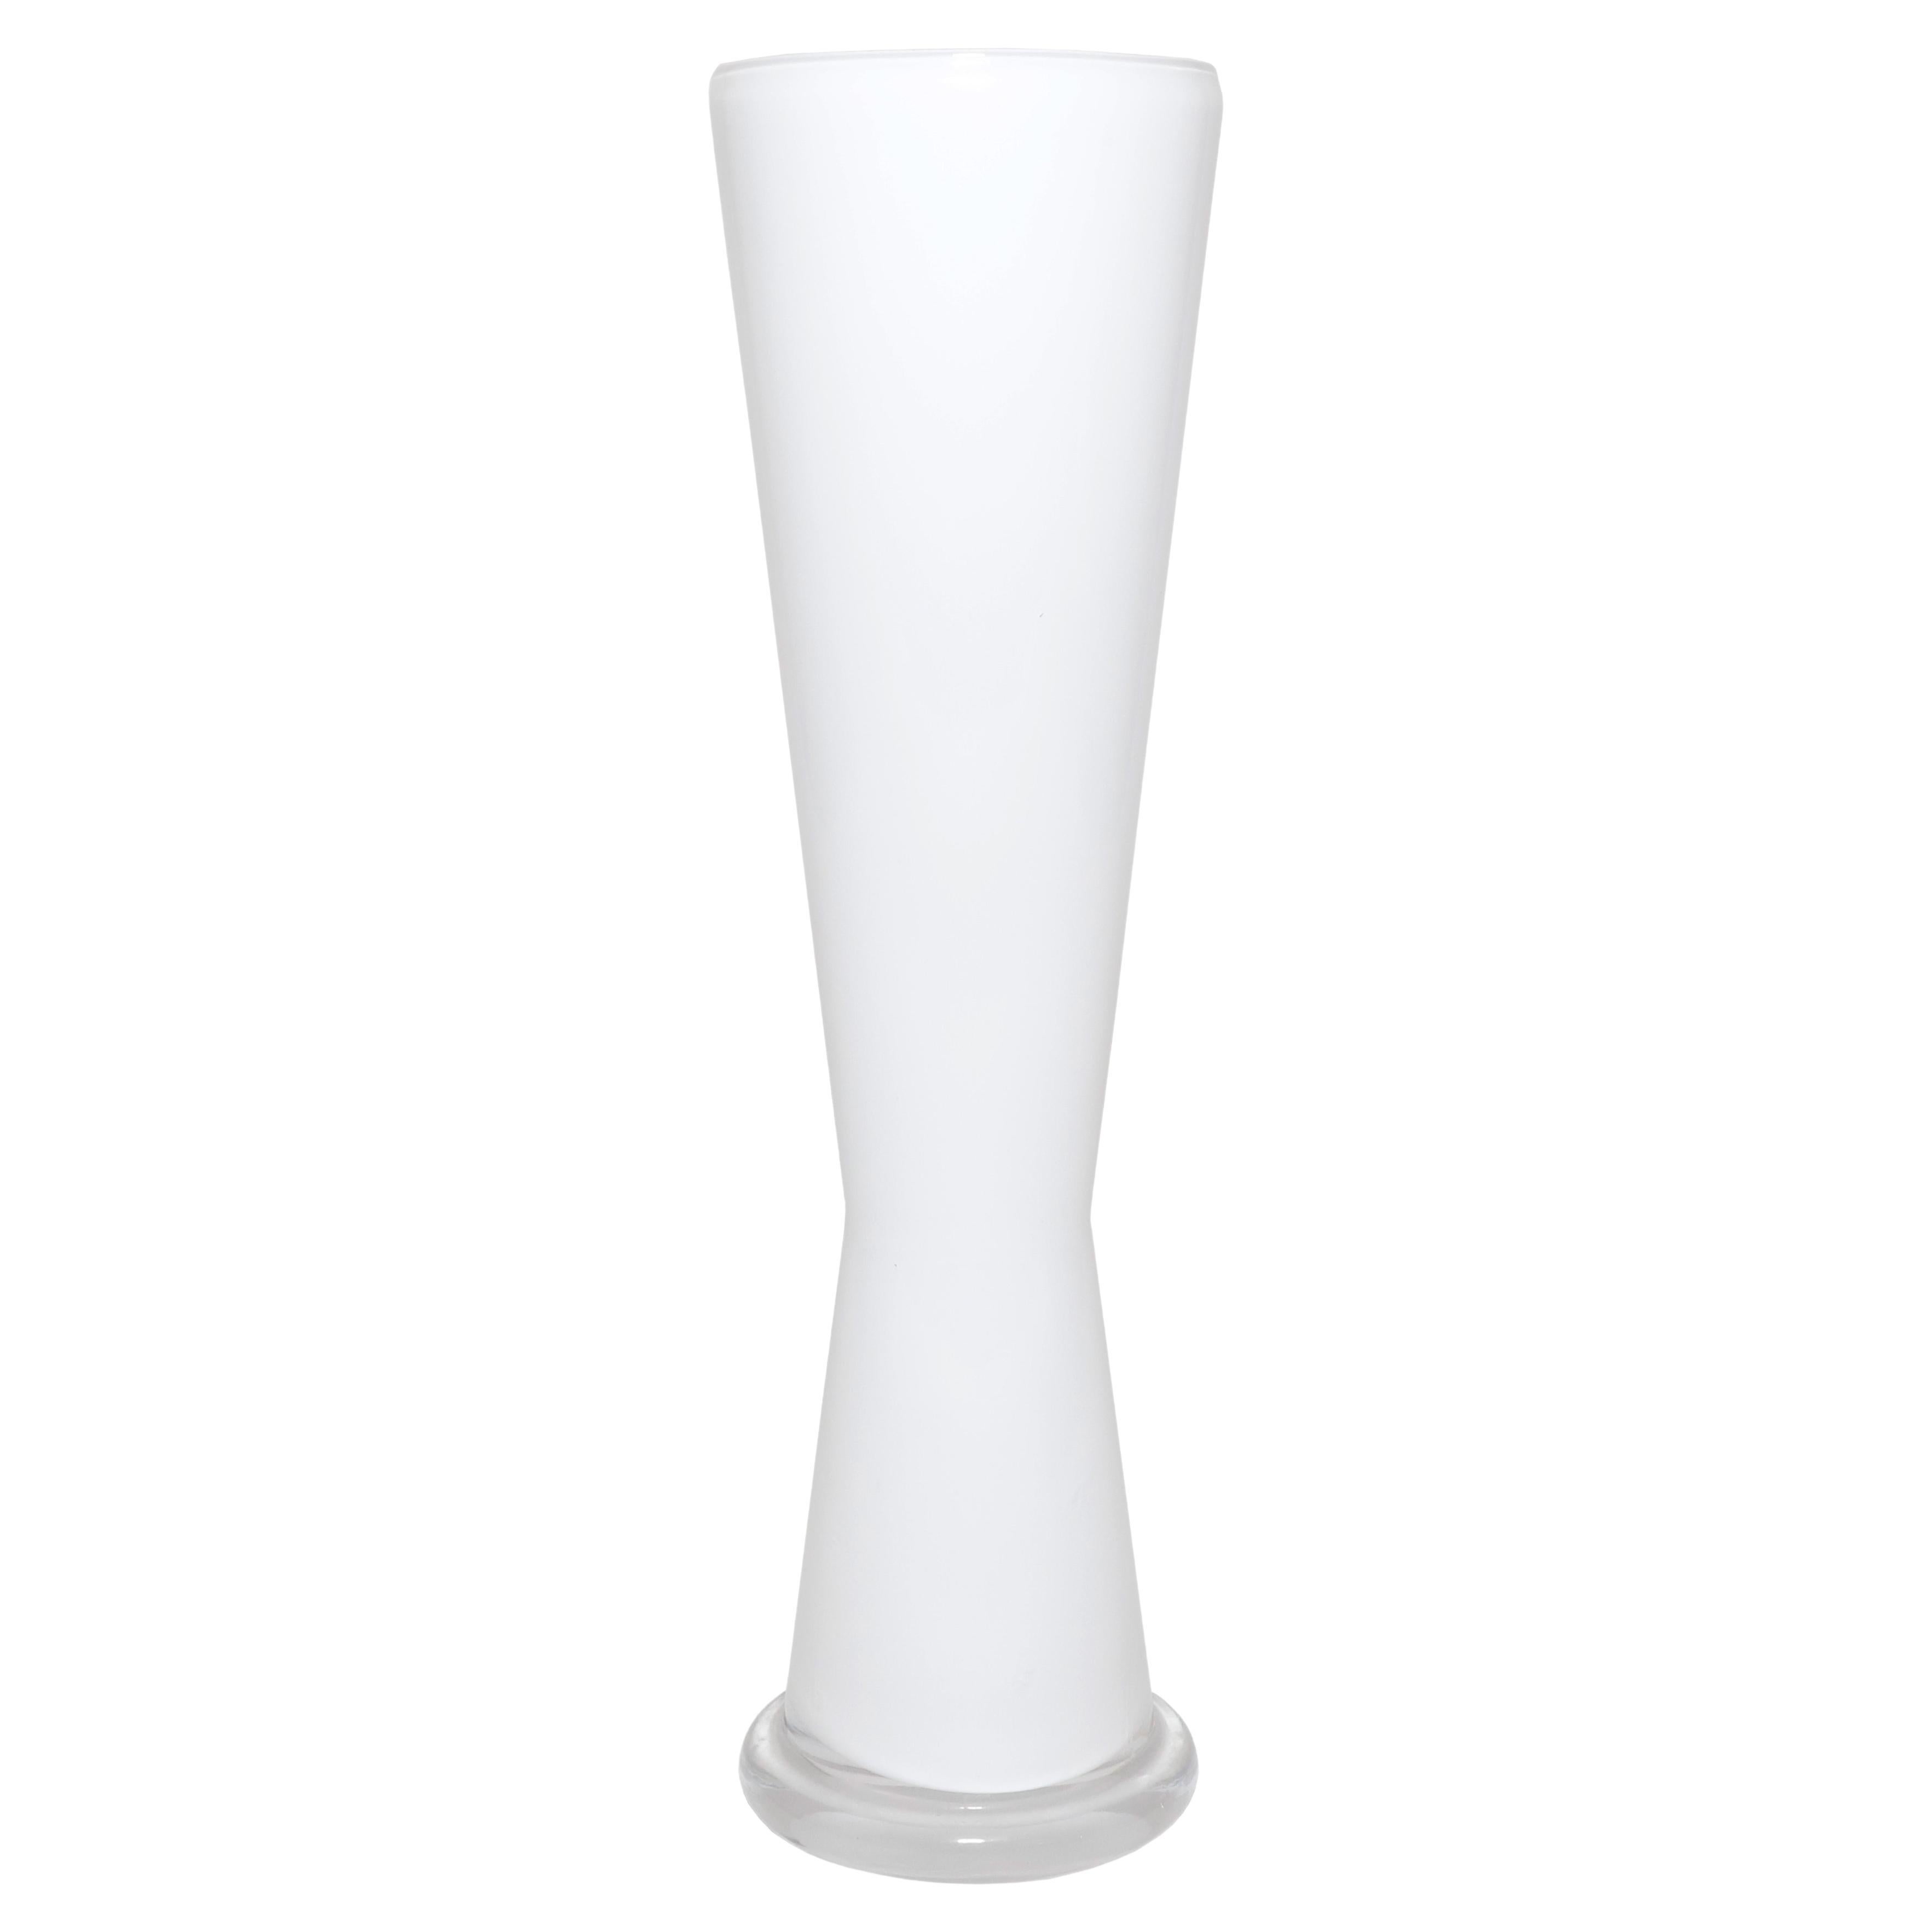 1980s Orrefors White Glass Tall Amaryliss Vase by Erika Lagerbielke